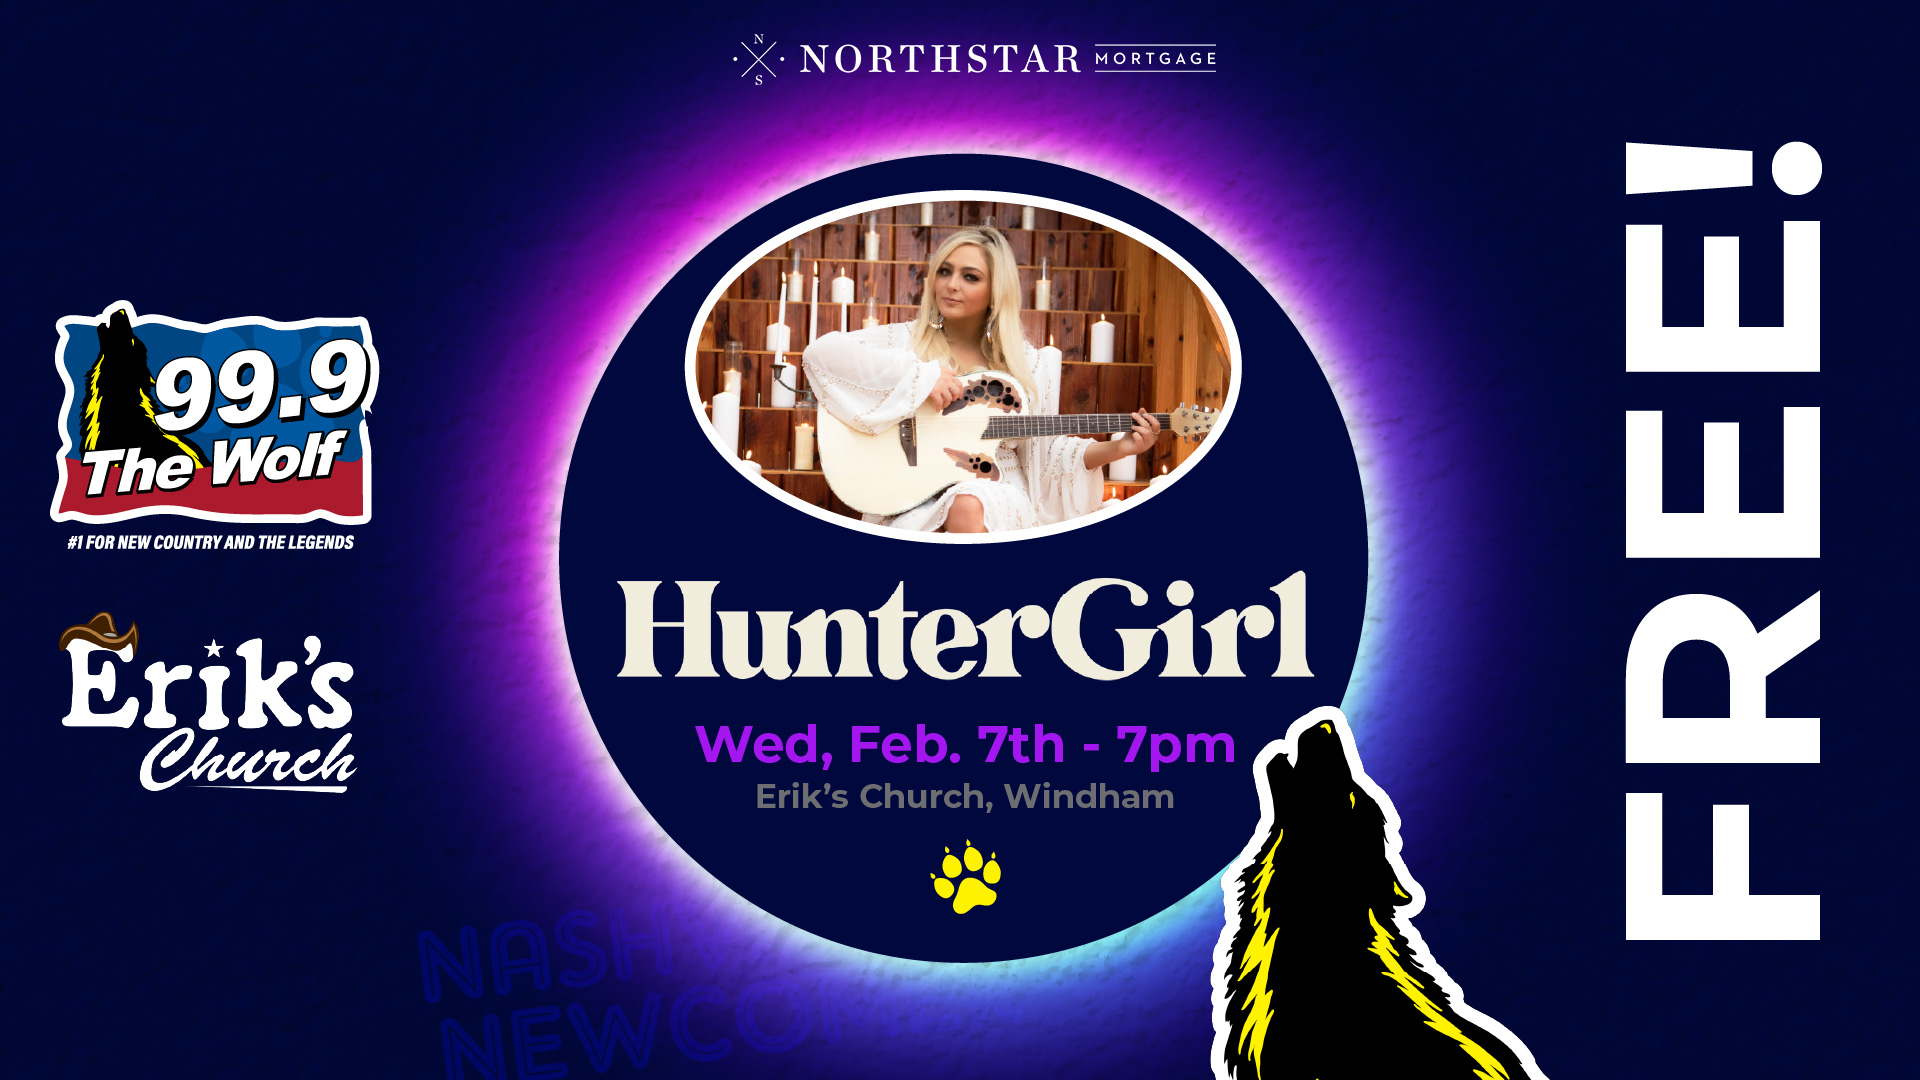 Nashville Newcomers Series Live at Erik’s Church With Huntergirl